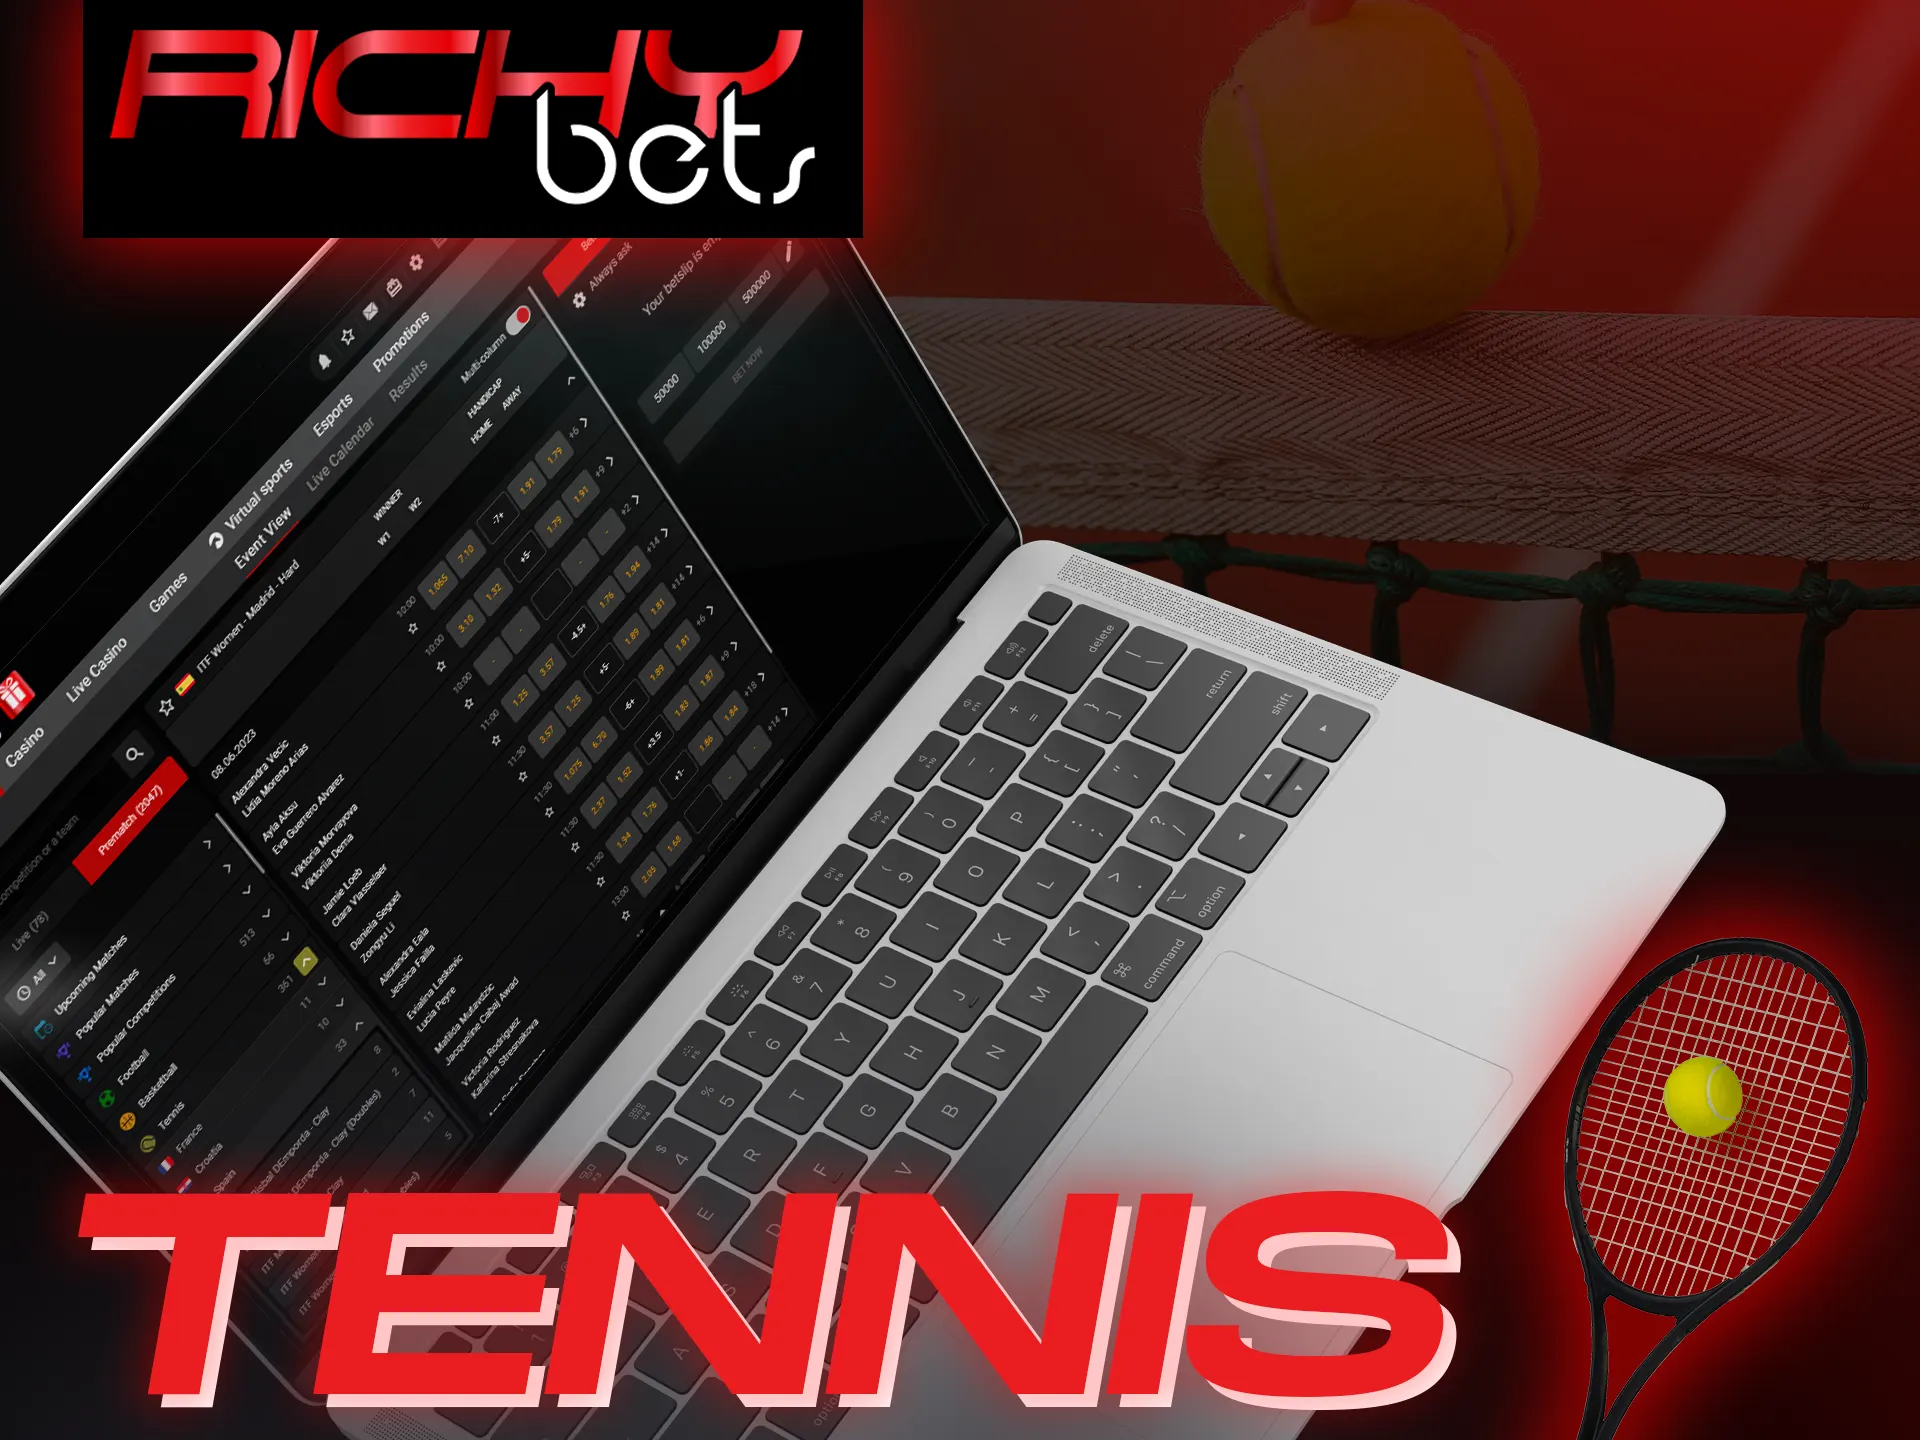 Bet on tennis games at the Richybets.